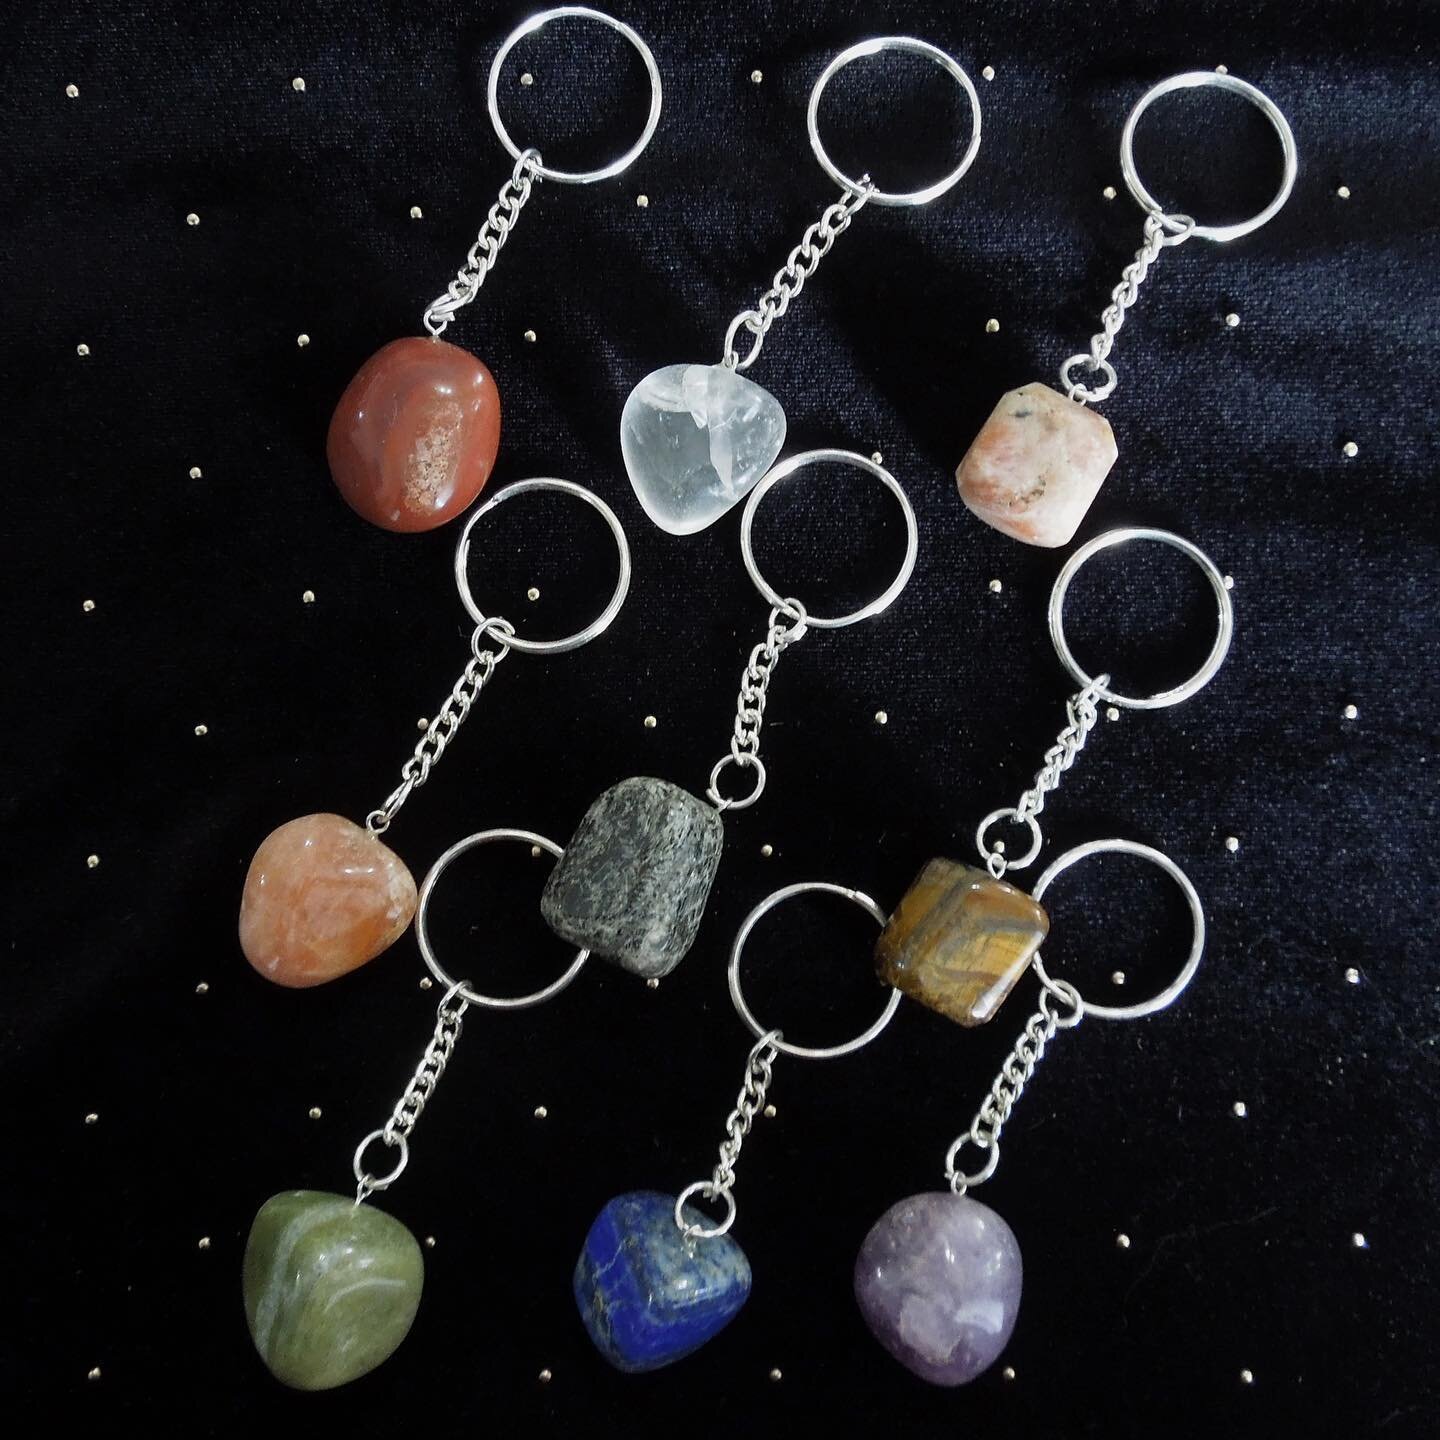 New gemstone keychains! $5 each
Many materials including: quartz, rose quartz, peach moonstone, tigers eye, adventurine, amethyst, lapis and more!

Dm or stop by to get yours 🌙

#gemstone #keychain #crystal #crystalhealing #quartz #rosequartz #agate